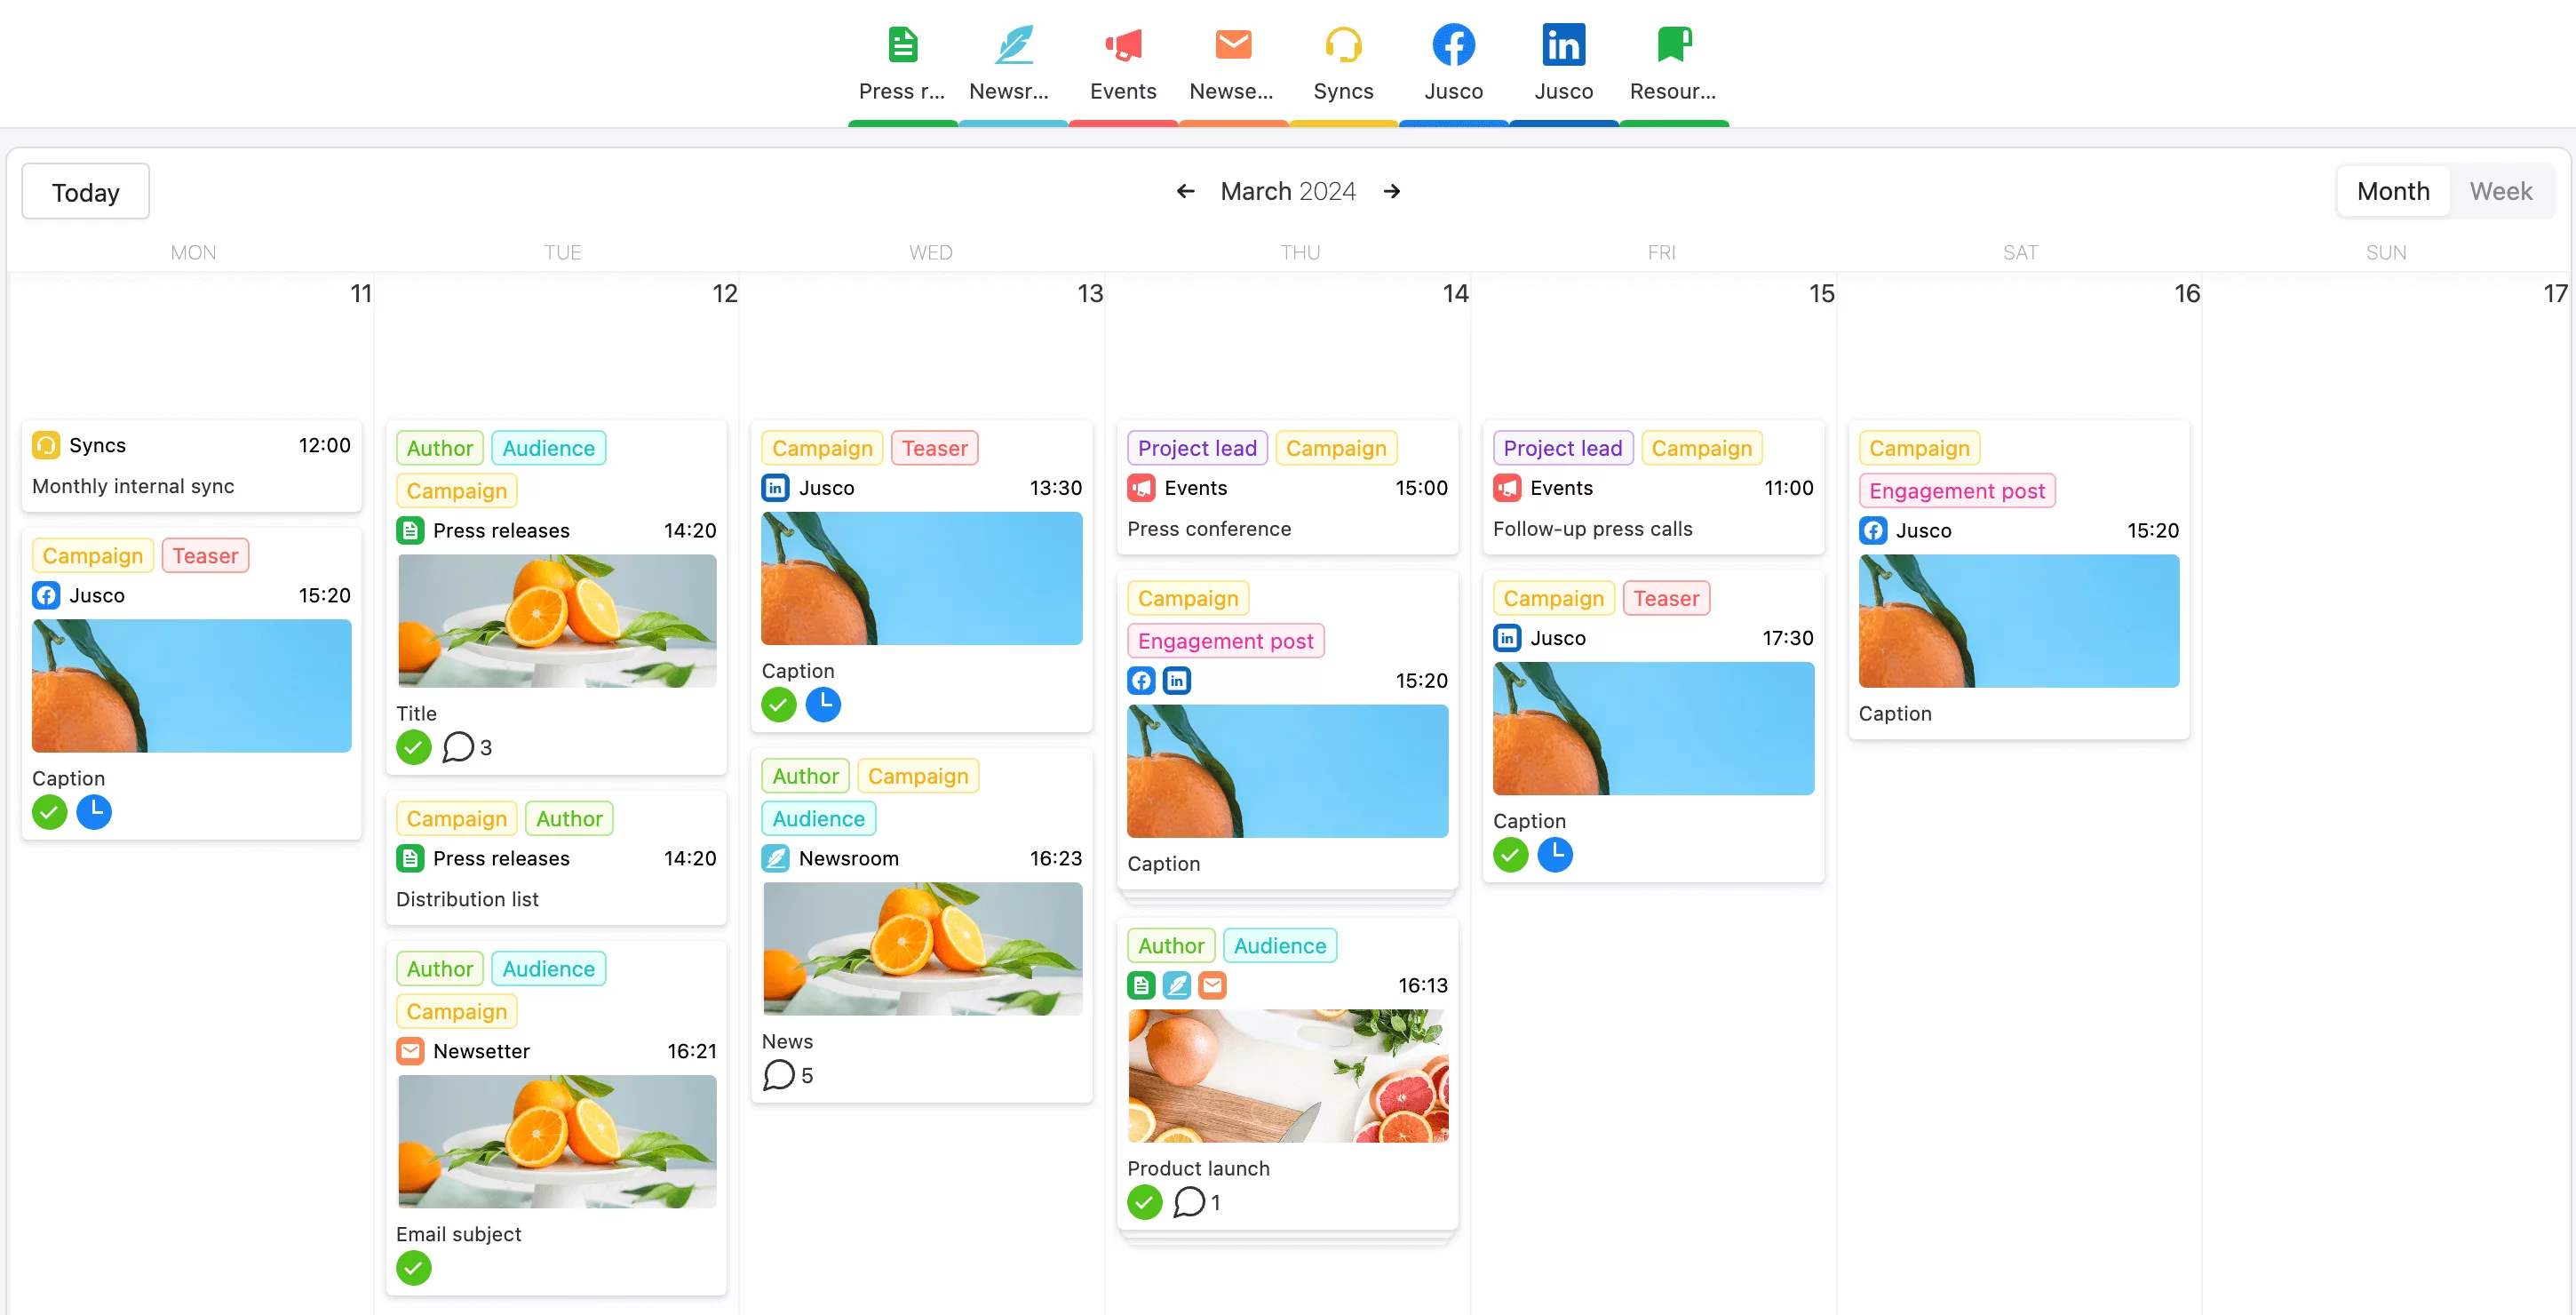 multiple types of PR content scheduled in the planable calendar by day and hour